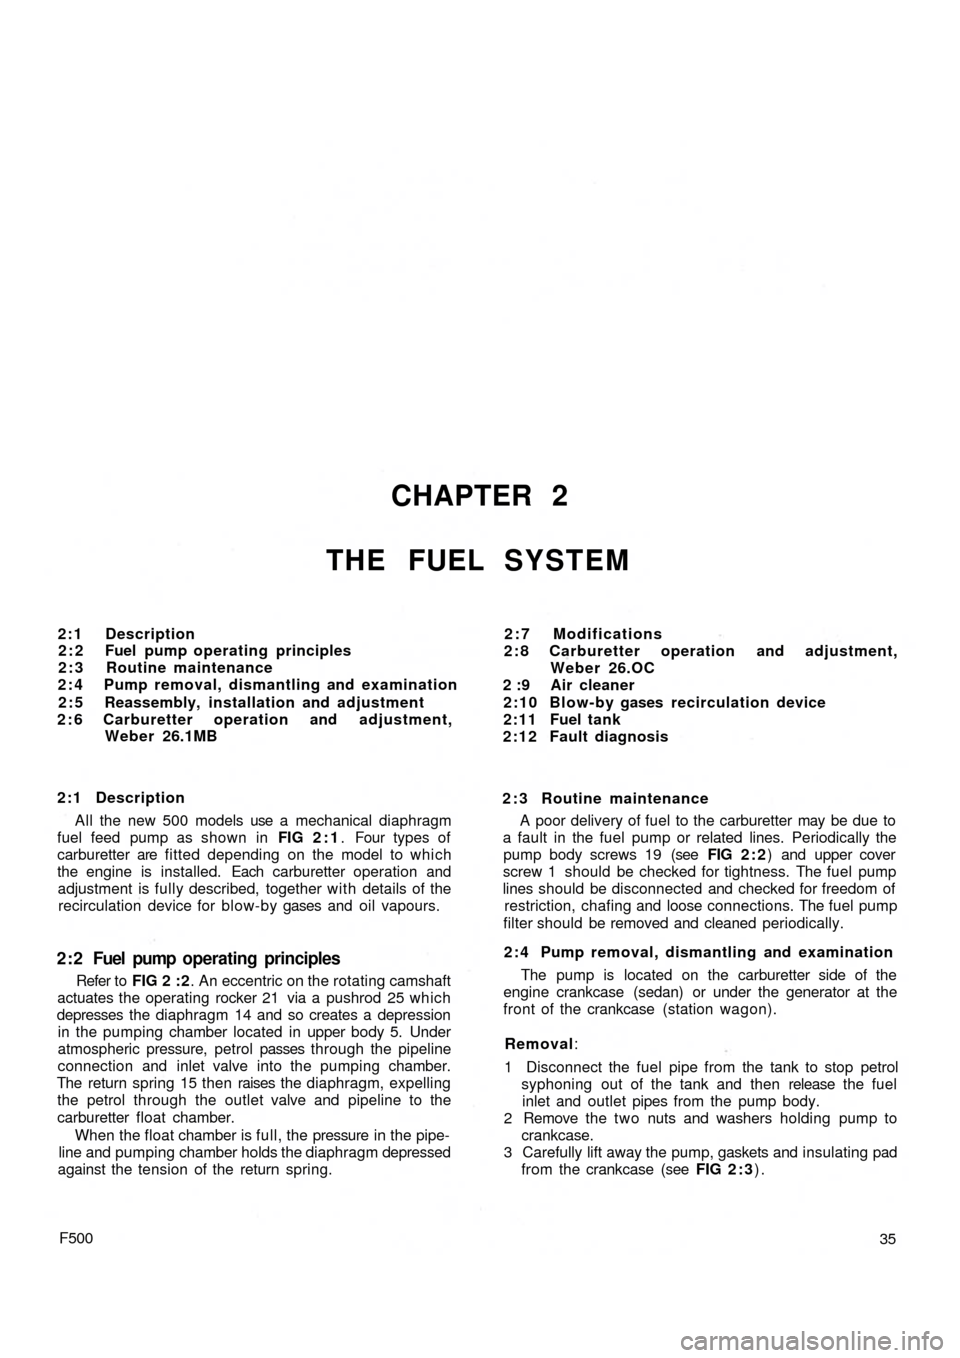 FIAT 500 1959 1.G Workshop Manual CHAPTER 2
THE FUEL SYSTEM
2:1 Description
2 : 2 Fuel pump operating principles
2 : 3 Routine maintenance
2 : 4 Pump removal, dismantling and examination
2 : 5 Reassembly, installation and adjustment
2